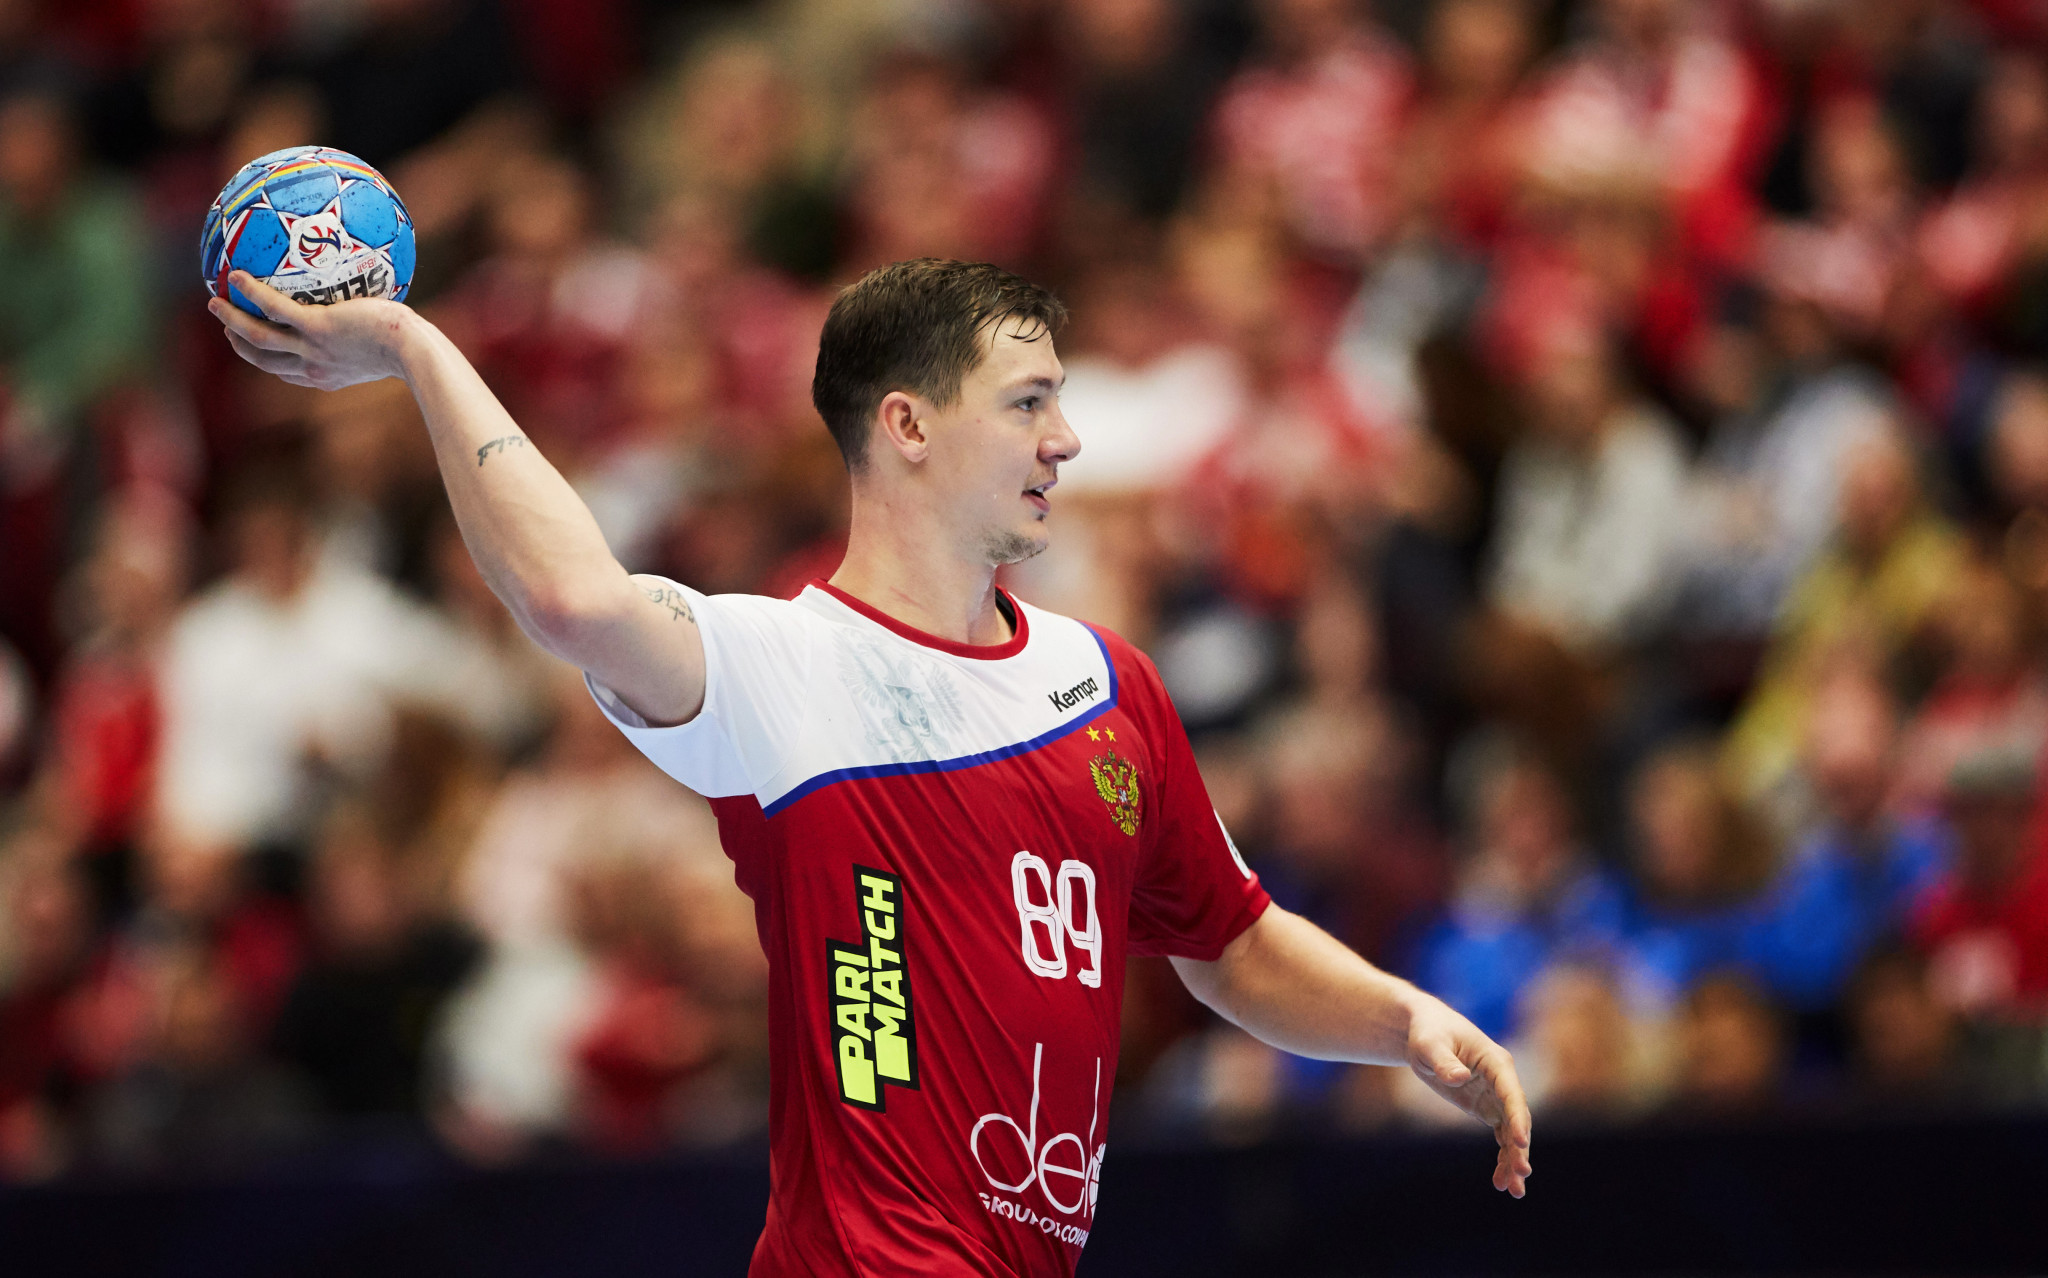 Poland and Russia given wildcards for 2021 IHF Men’s World Championship 